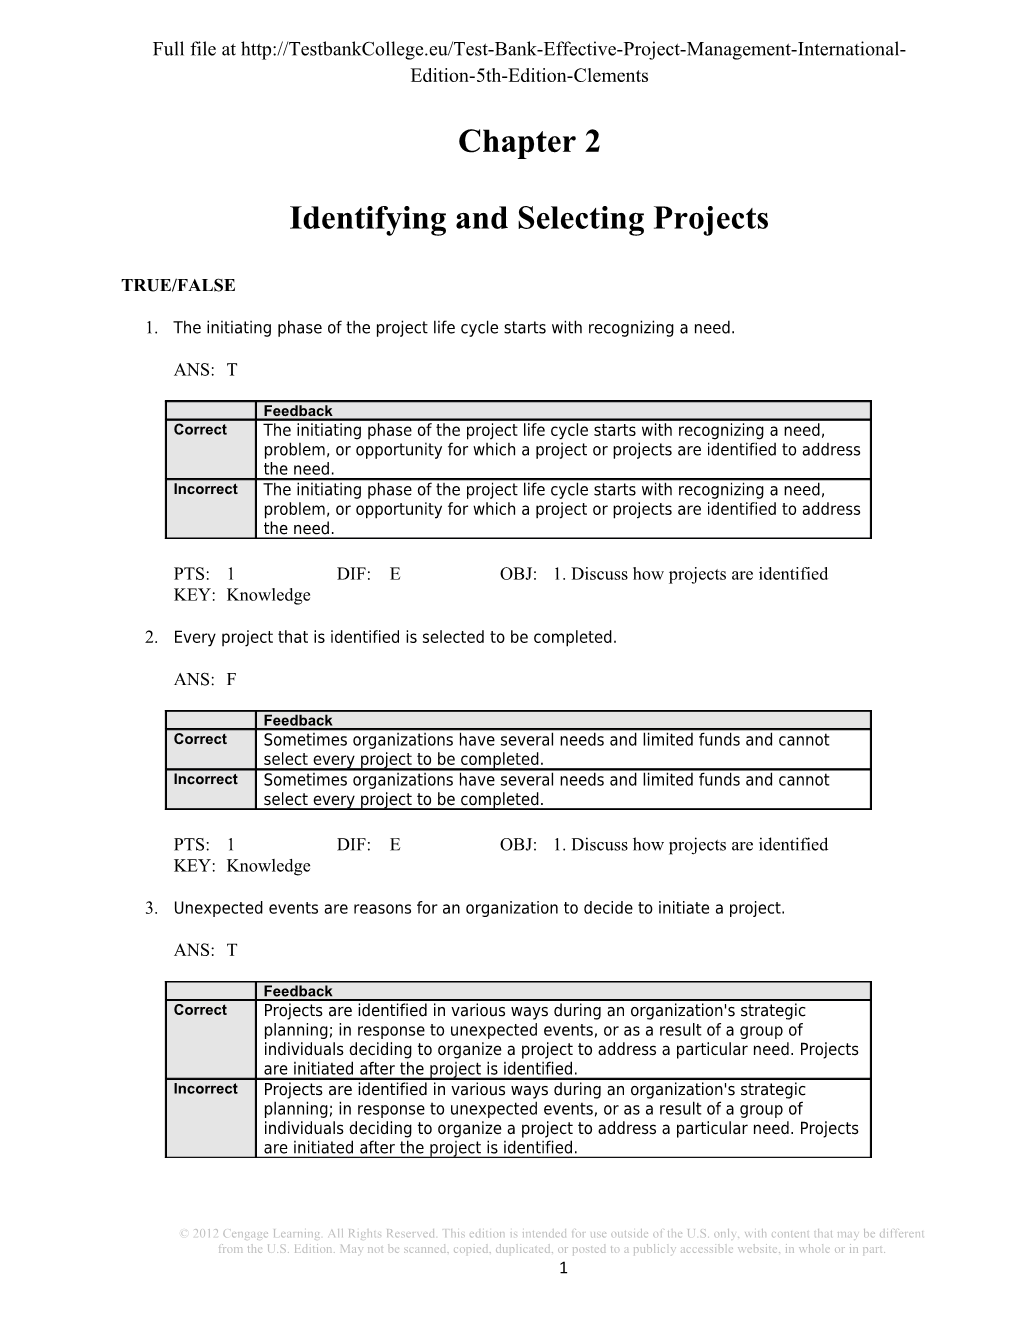 Identifying and Selecting Projects